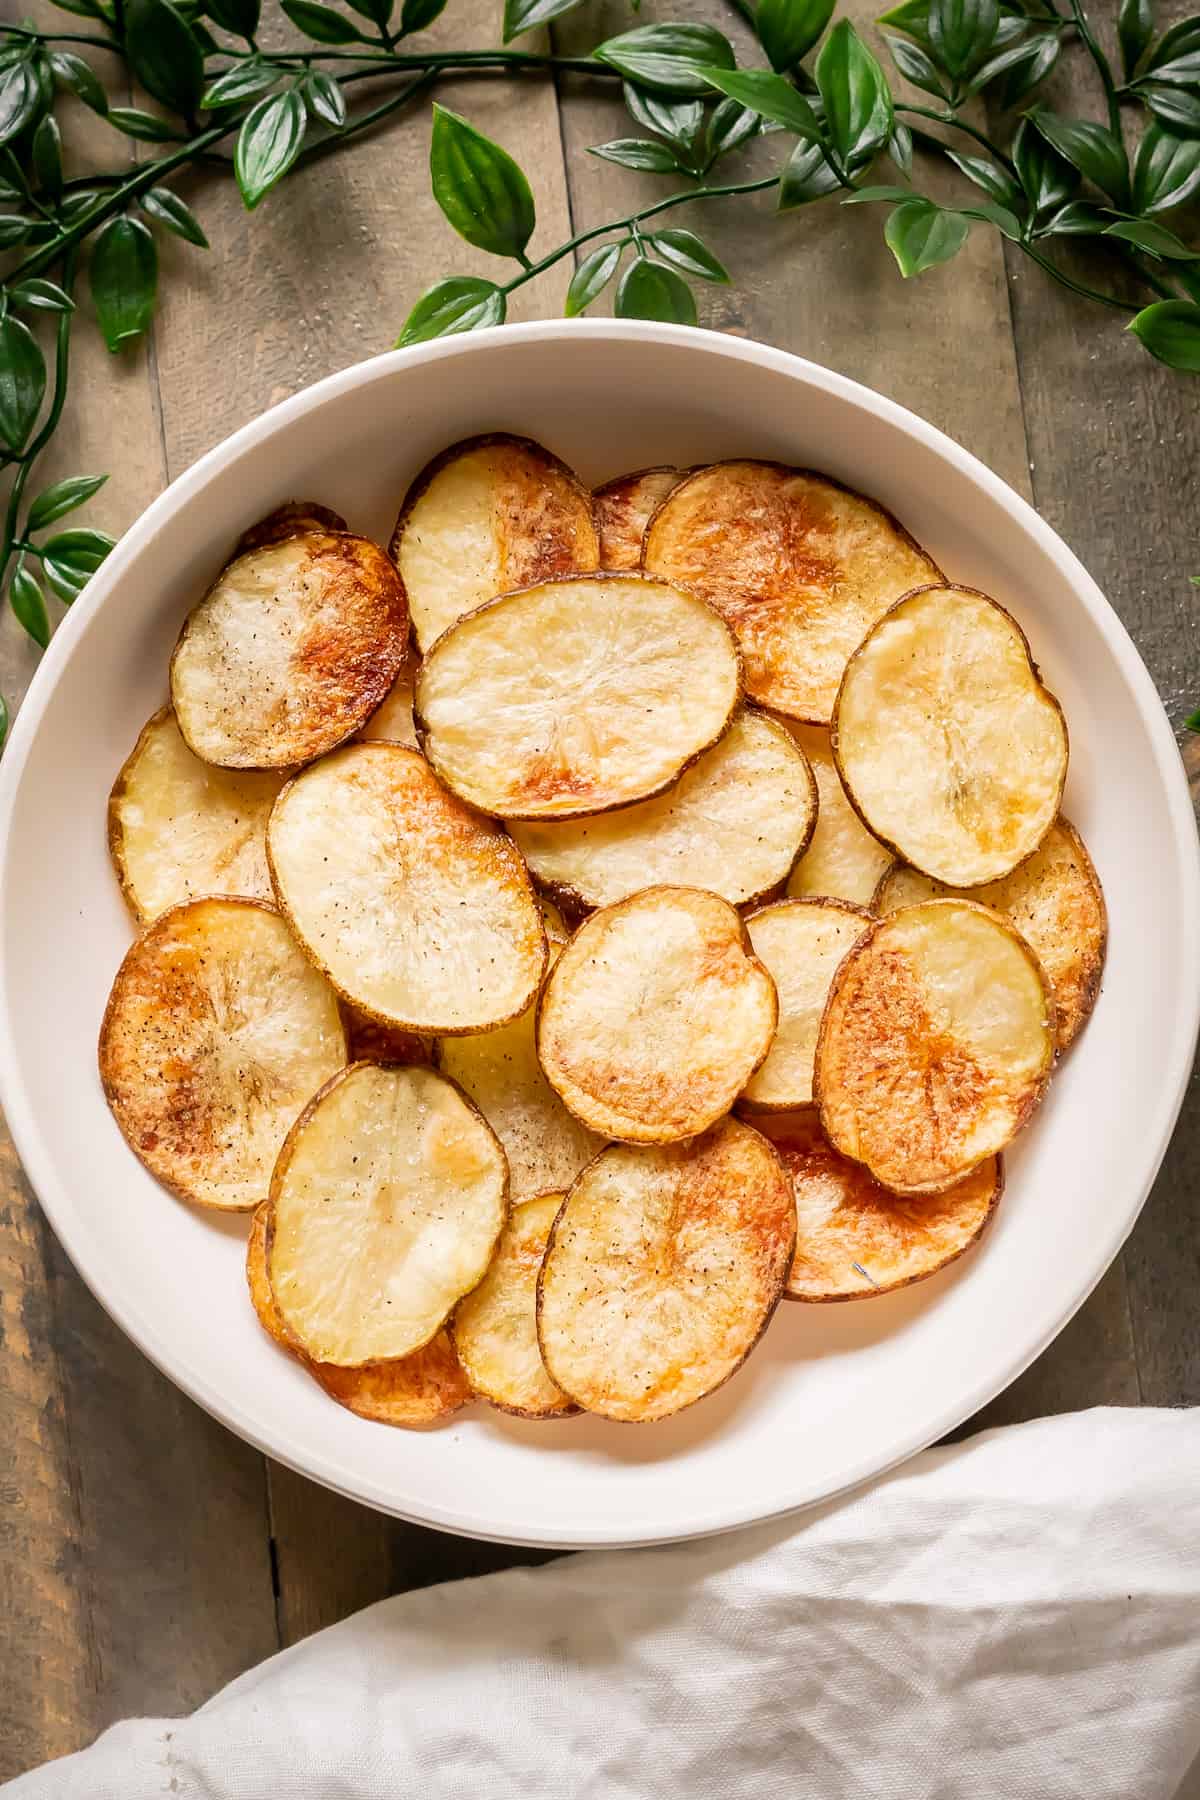 A serving bowl of freshly baked cottage fries.